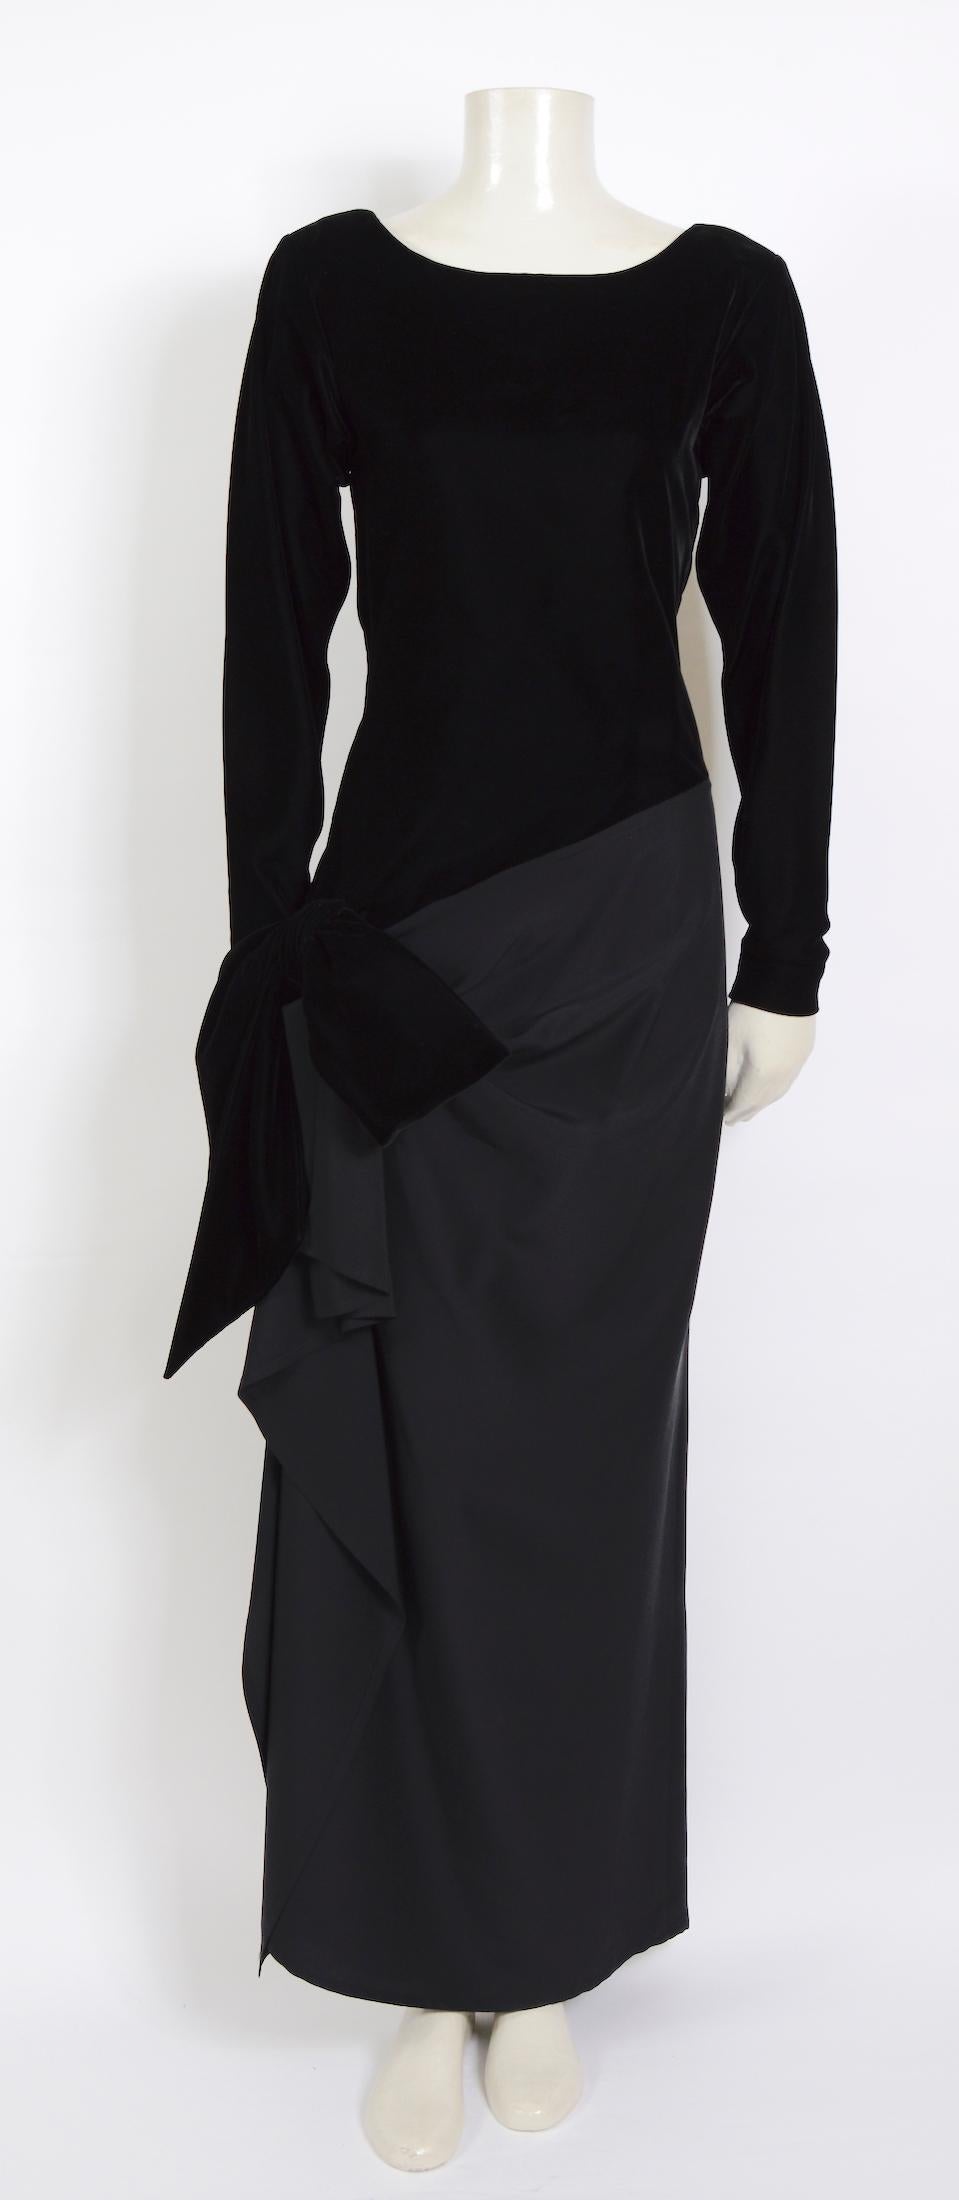 An amazing and rare vintage women's long sleeve velvet and silk evening dress from the 80s by Yves Saint Laurent for the iconic 